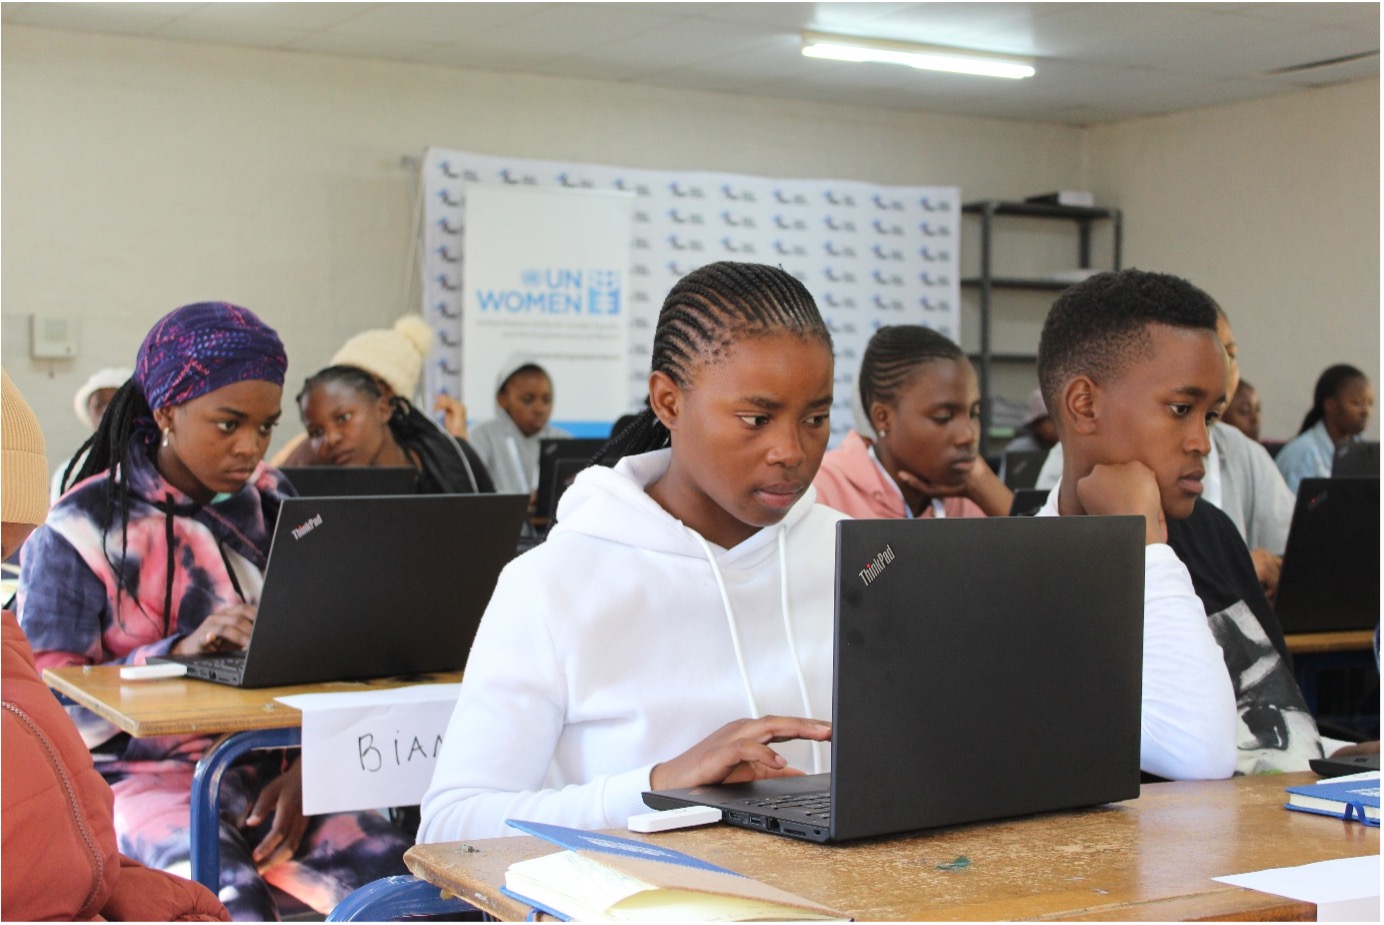 Vuyiswa Mpofu from Ermelo in Mpumalanga Province left the coding camp inspired and motivated to excel in her science and maths studies so she can study further in the field post-high school. Photo: Maphuti Mahlaba/ UN Women South Africa Multi-Country Office